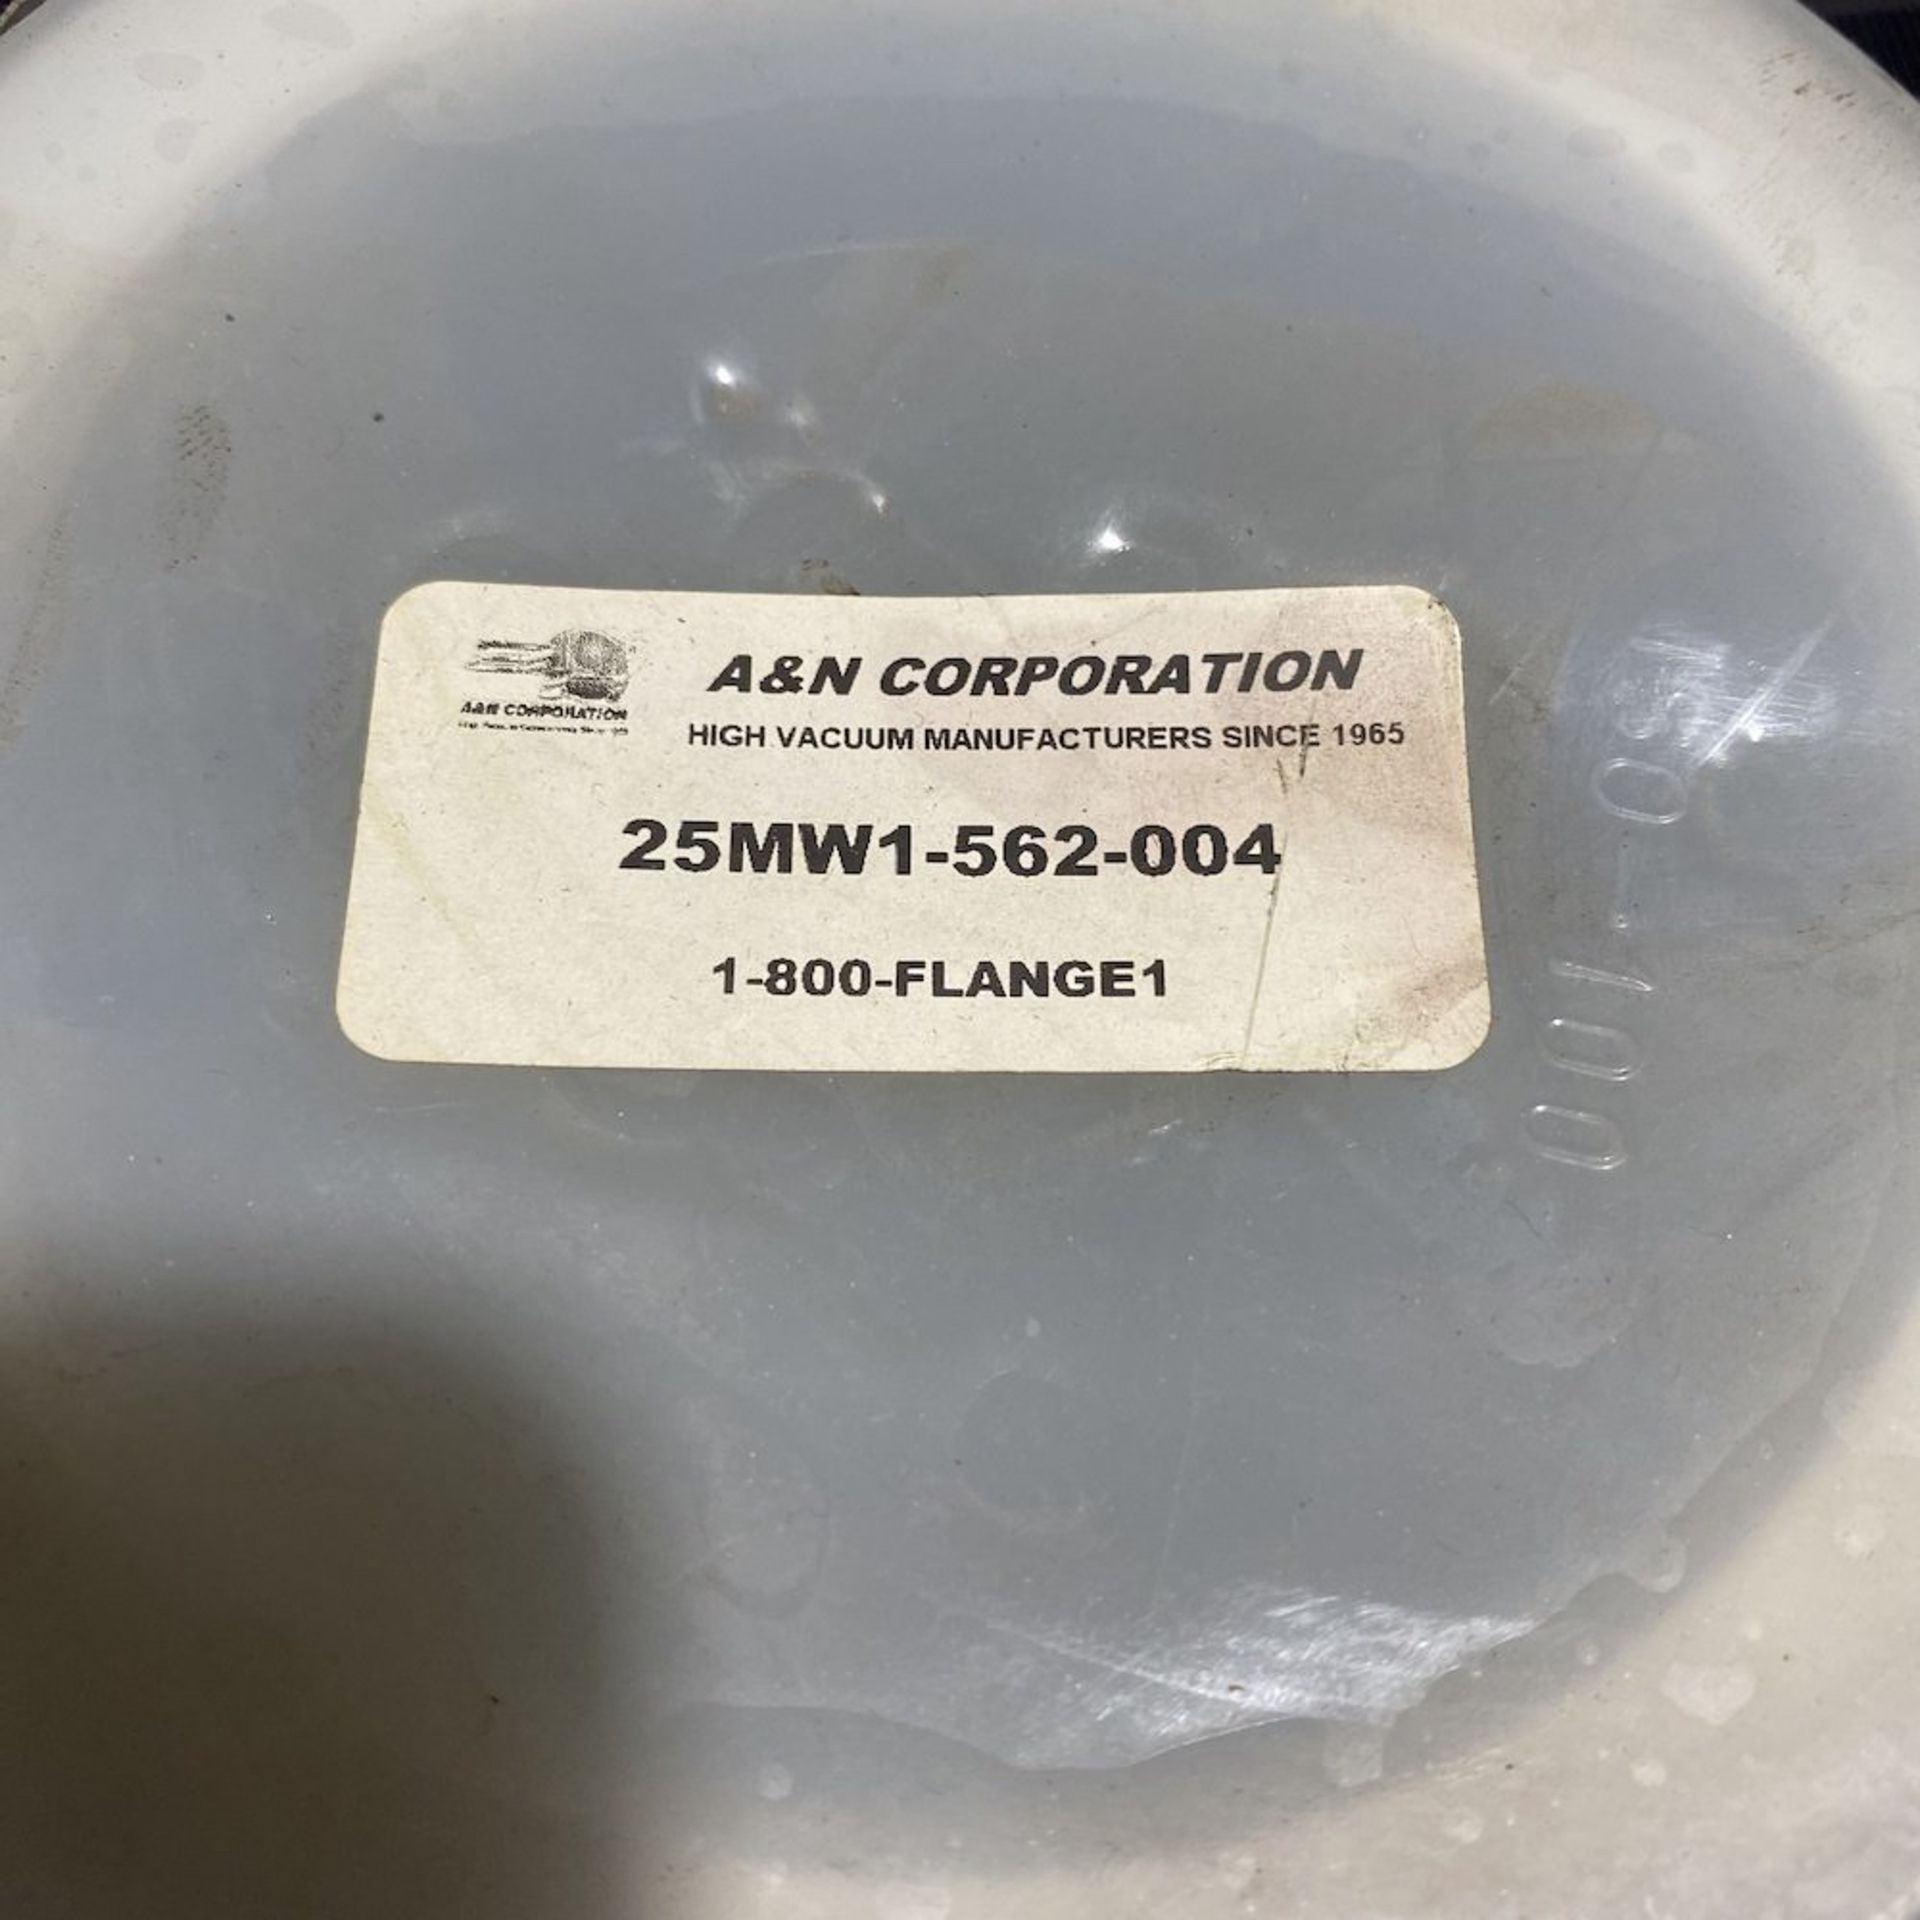 NEW A & N CORP 25MW1-562-004 CONFLAT FLANGE TO ISO 100 FLANGE ADAPTER FITTING - Image 2 of 2